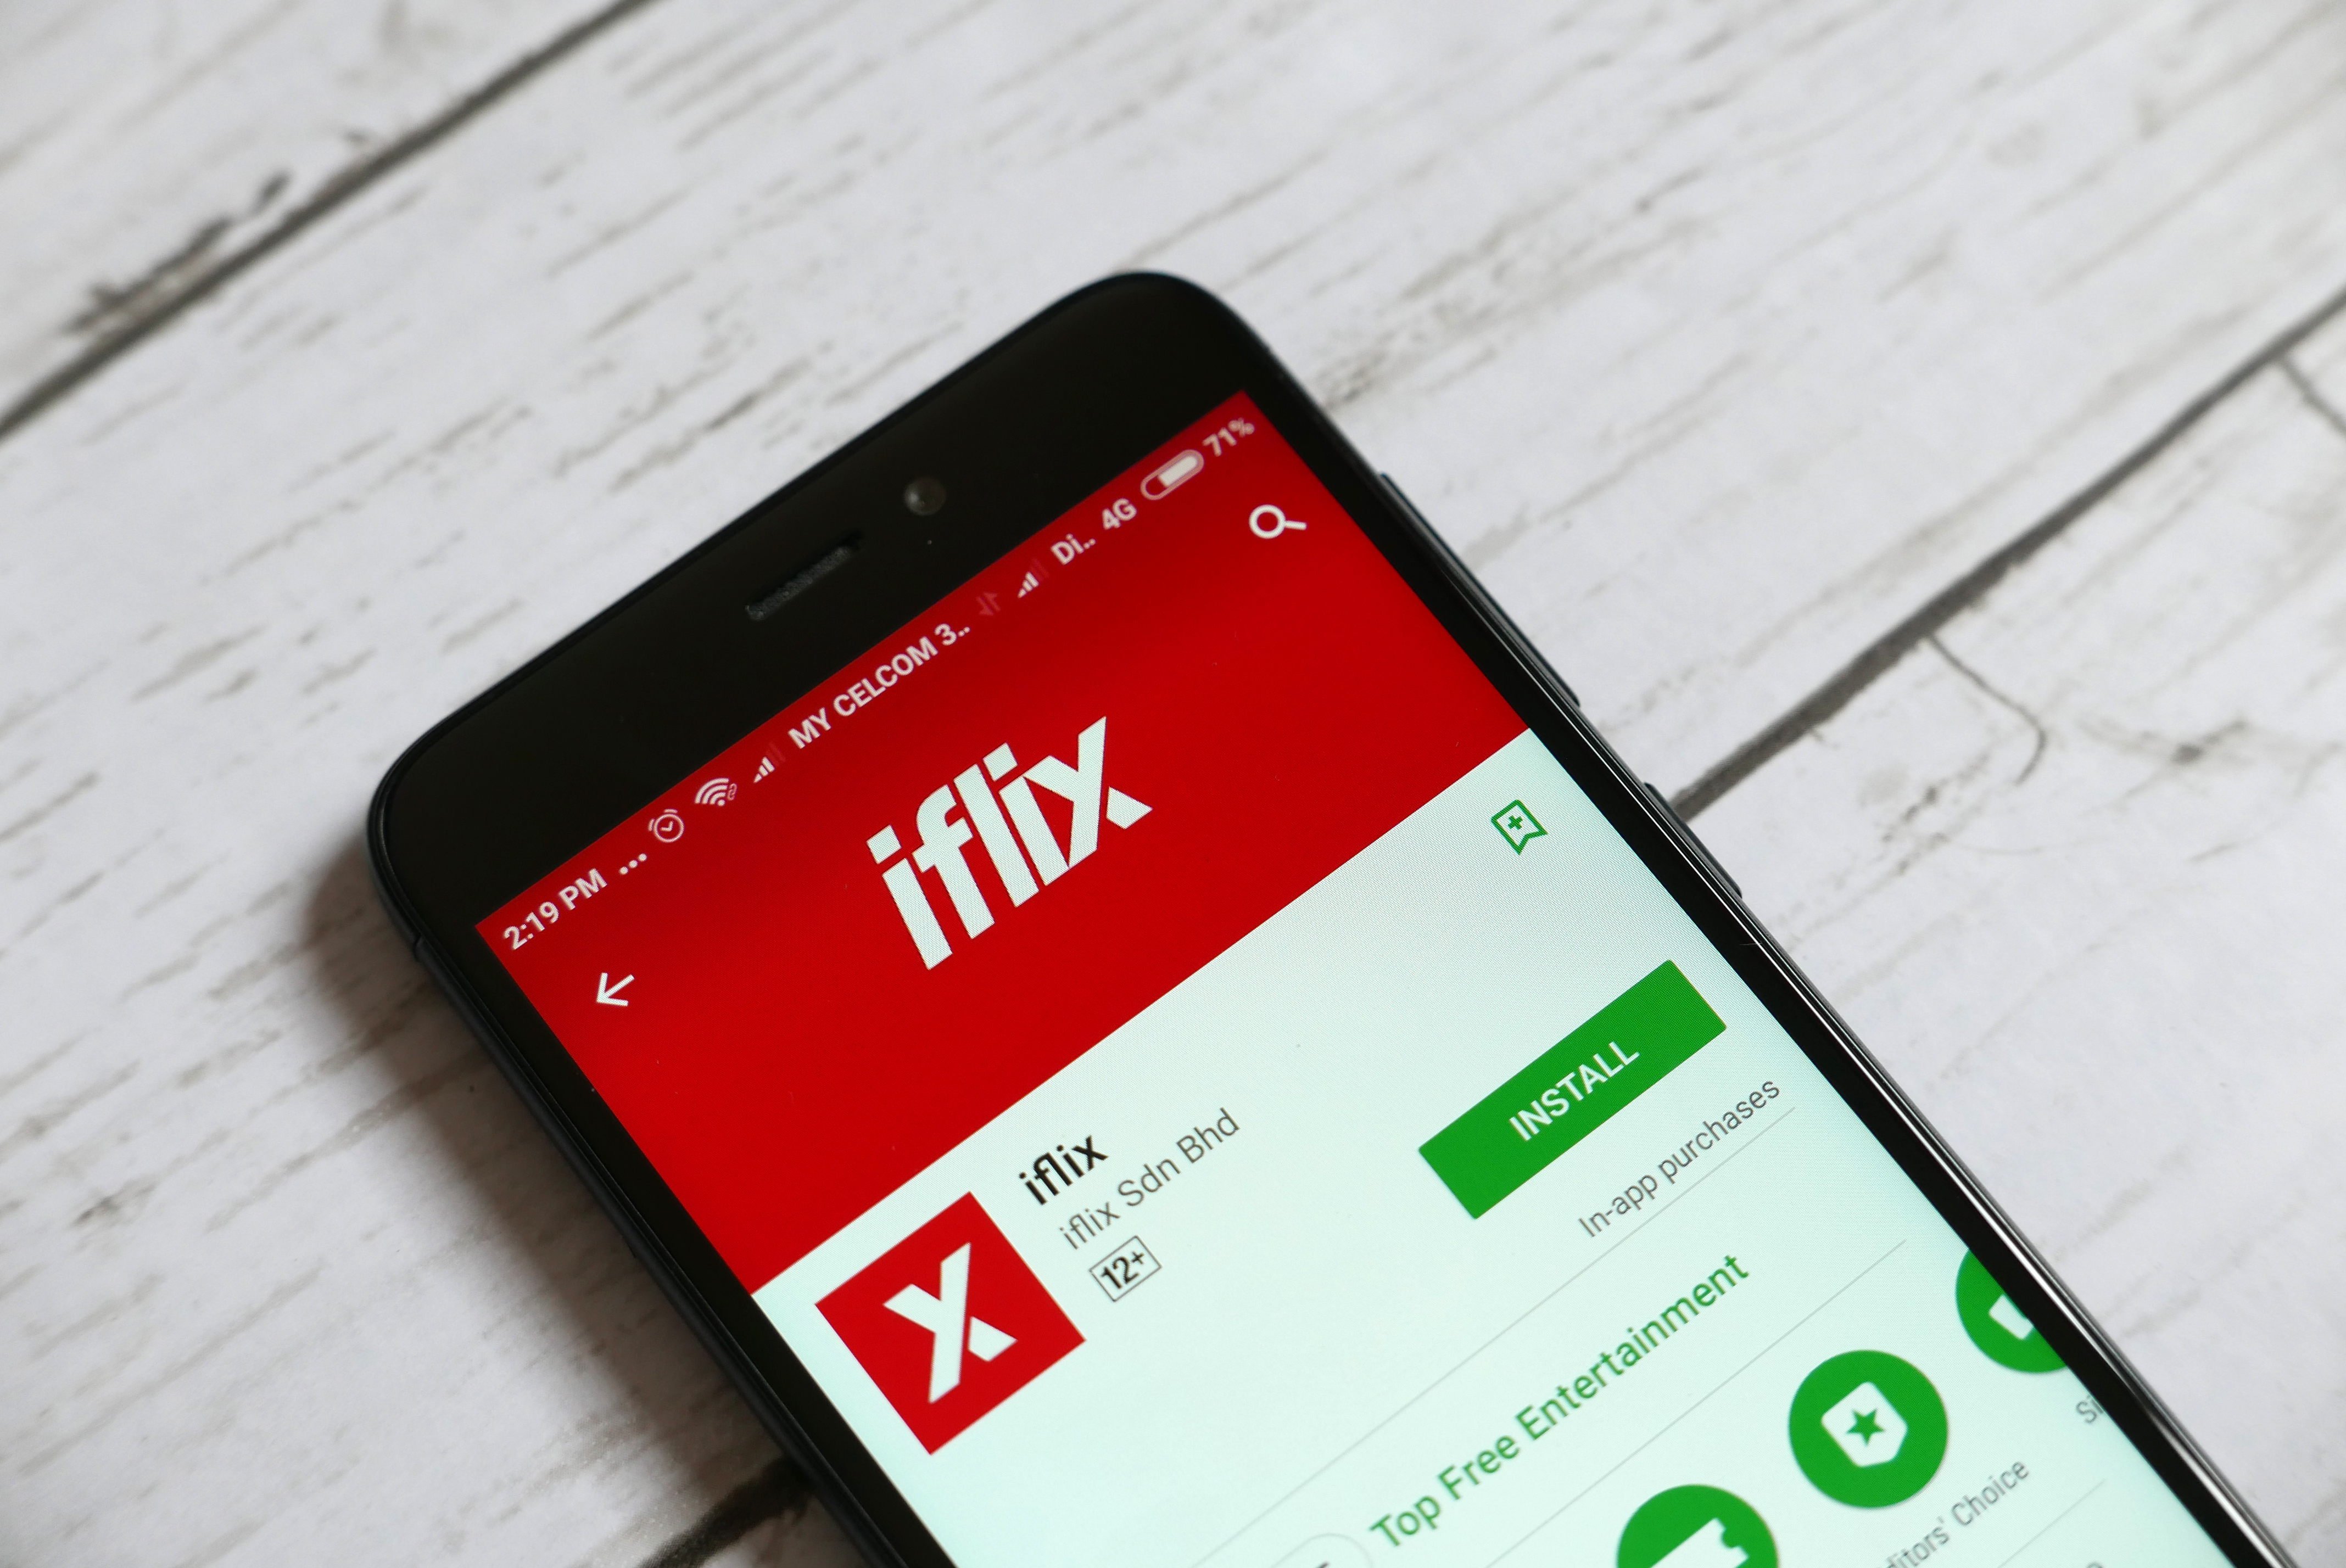 Video streaming player Iflix plans for an IPO this year